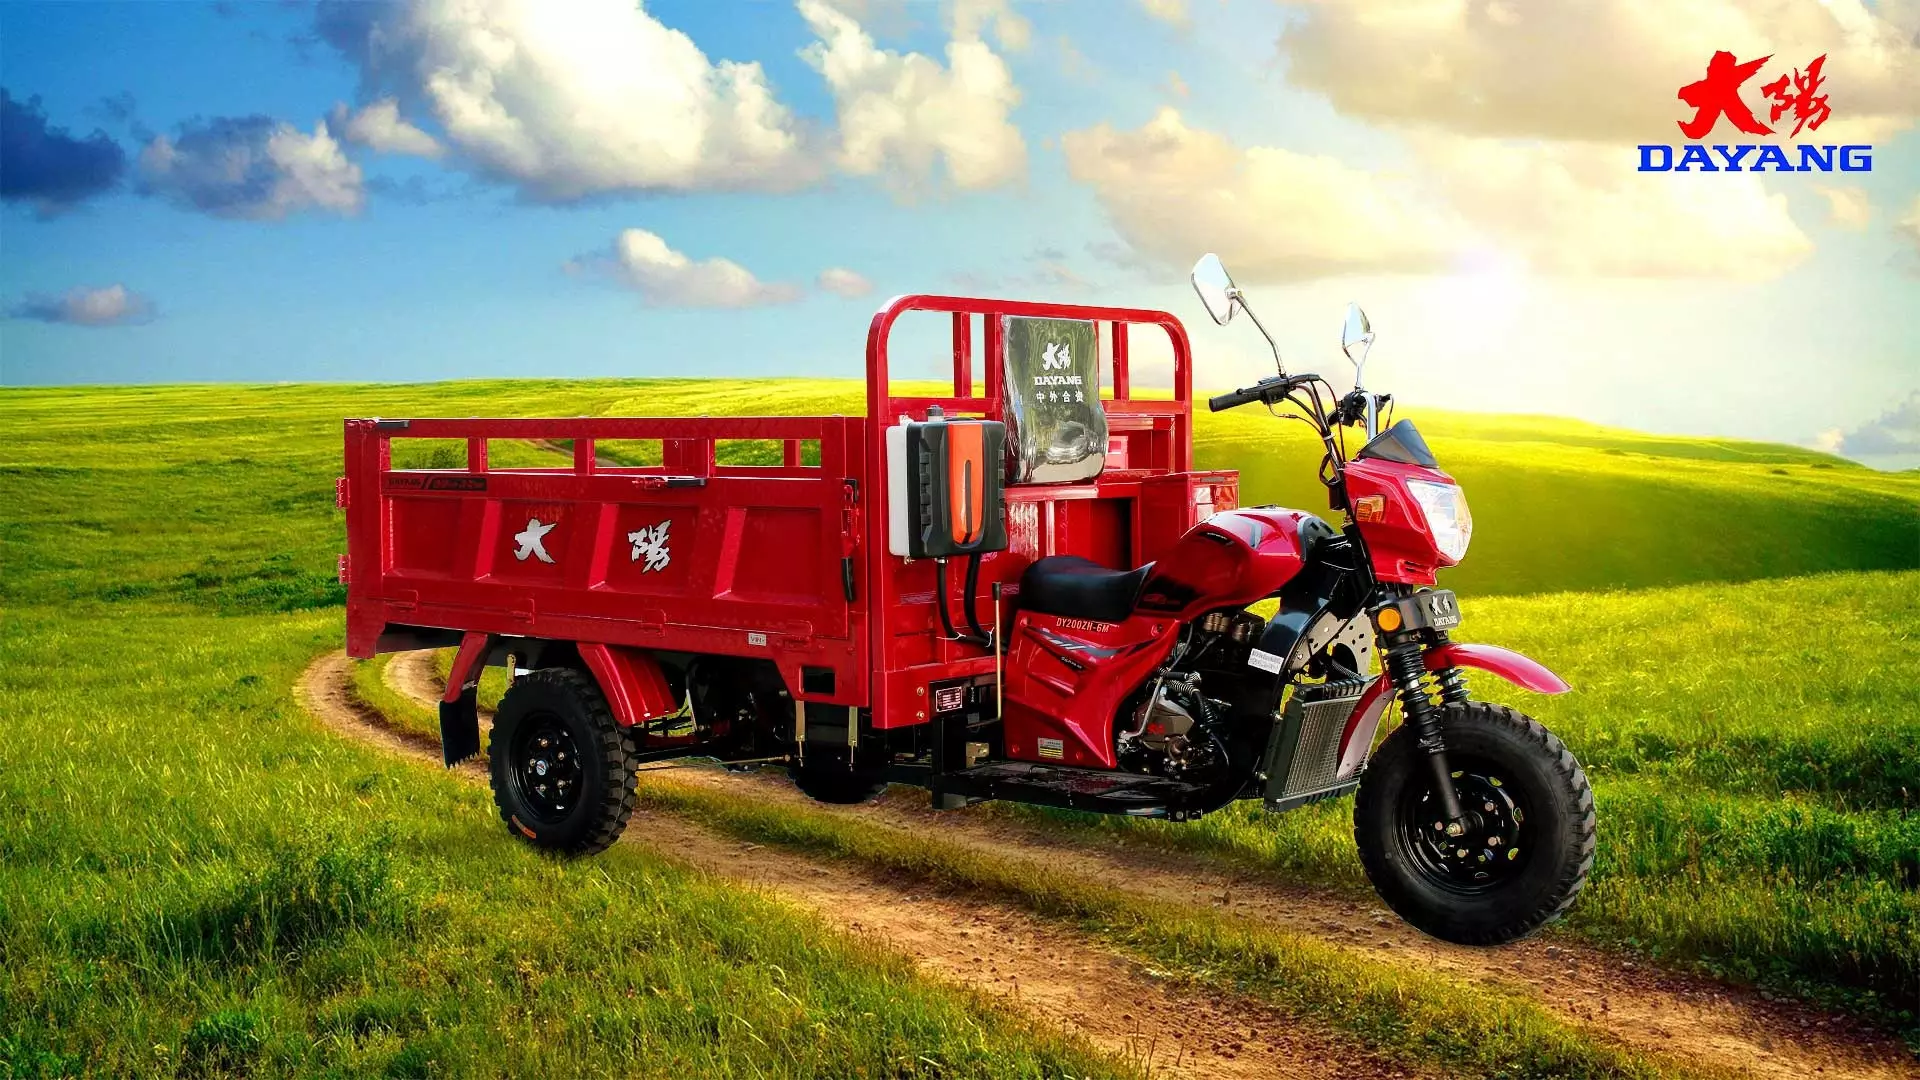 New Luxury Motorcycle Motorized Gas Power good design truck chinese cargo sudan motor tricycle trimoto engine 200cc